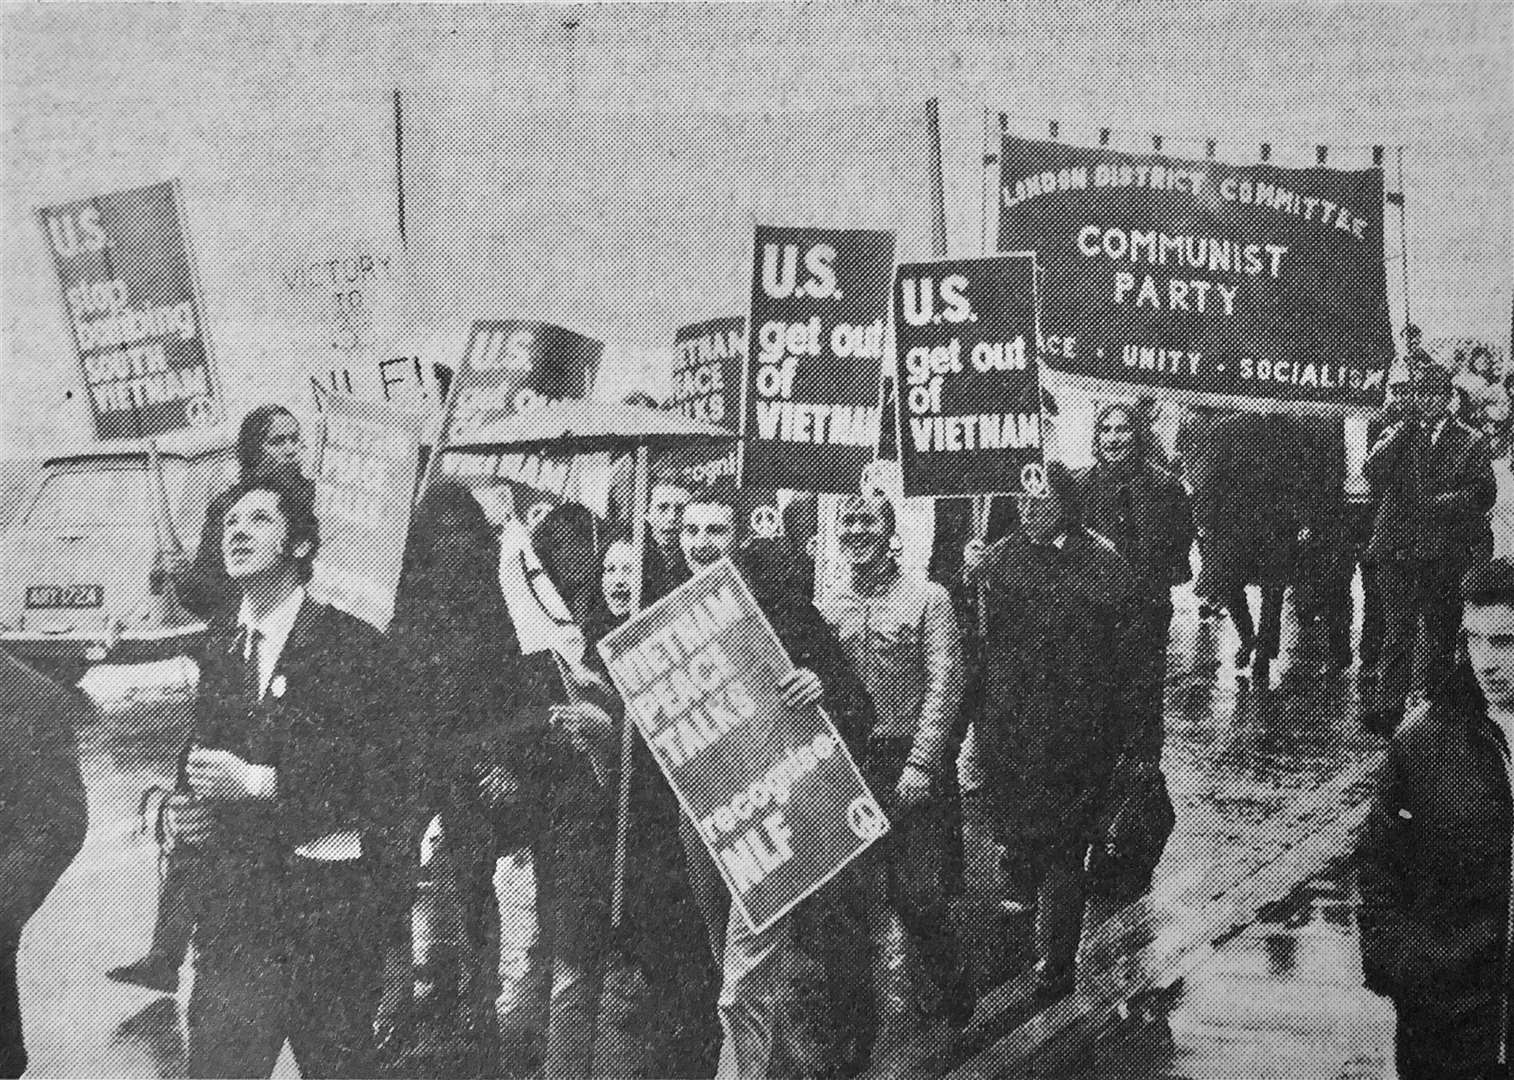 A newspaper image of marching protestors